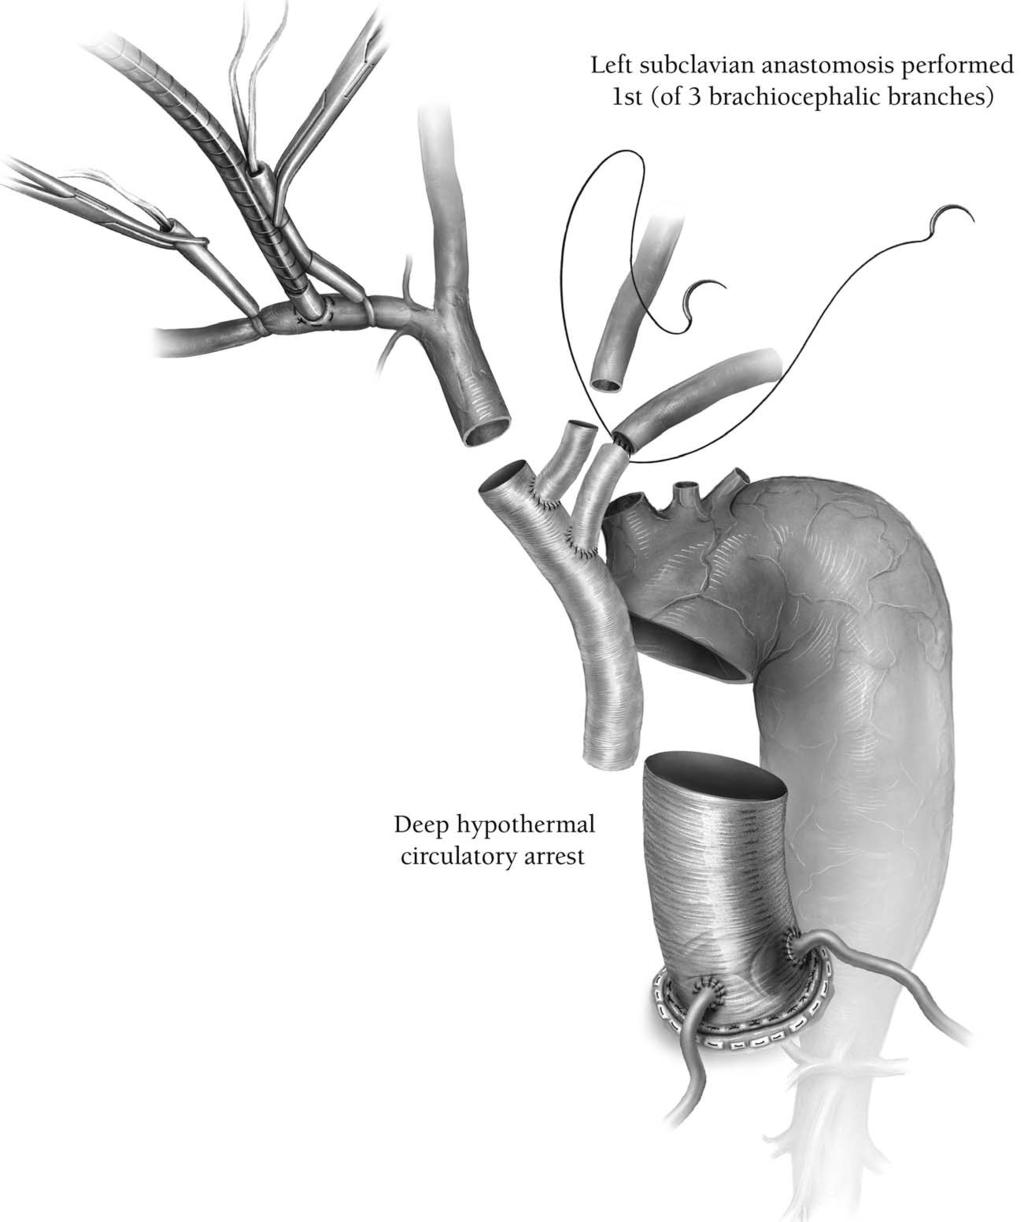 Aortic arch replacement/selective antegrade perfusion 29 Figure 6 During deep hypothermic circulatory arrest, the brachiocephalic vessels are transected just distal to their origins sharply with a